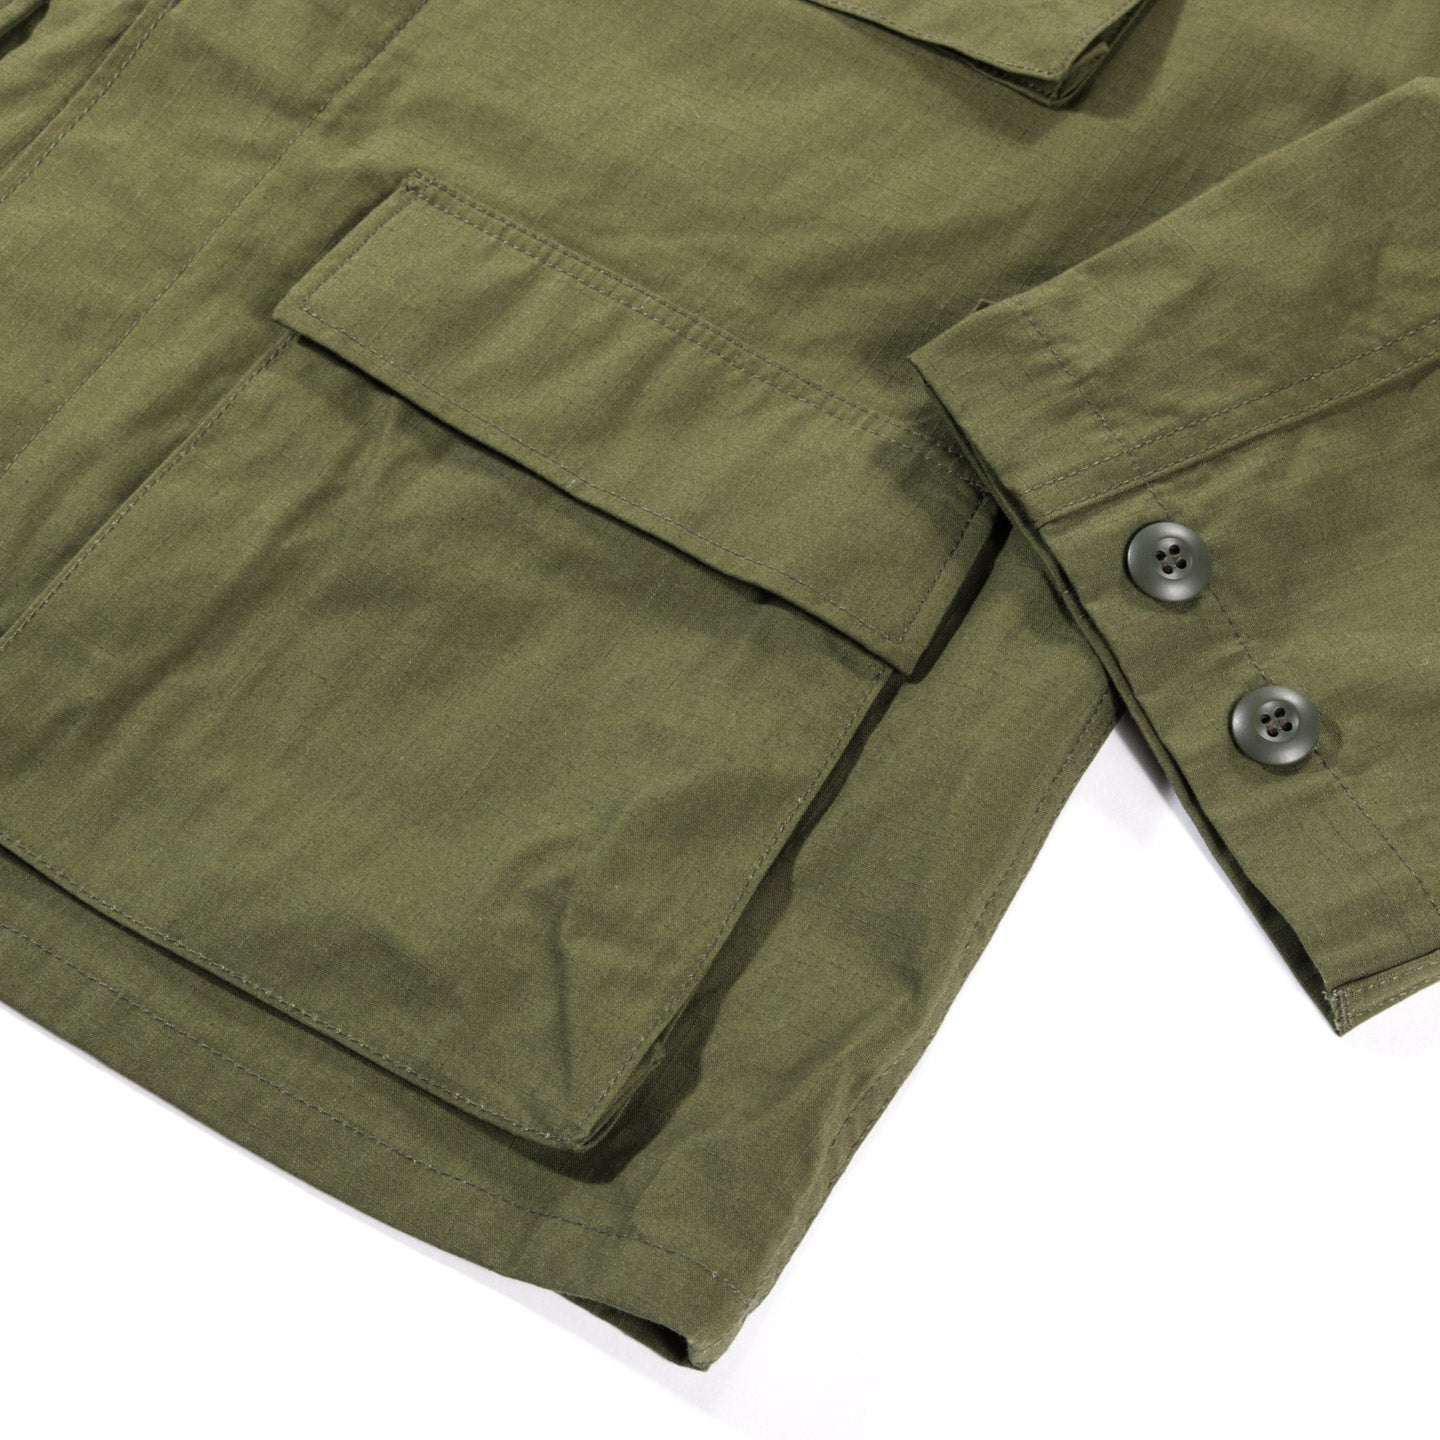 WTAPS MILL LS 01 SHIRT OLIVE DRAB NYCO RIPSTOP